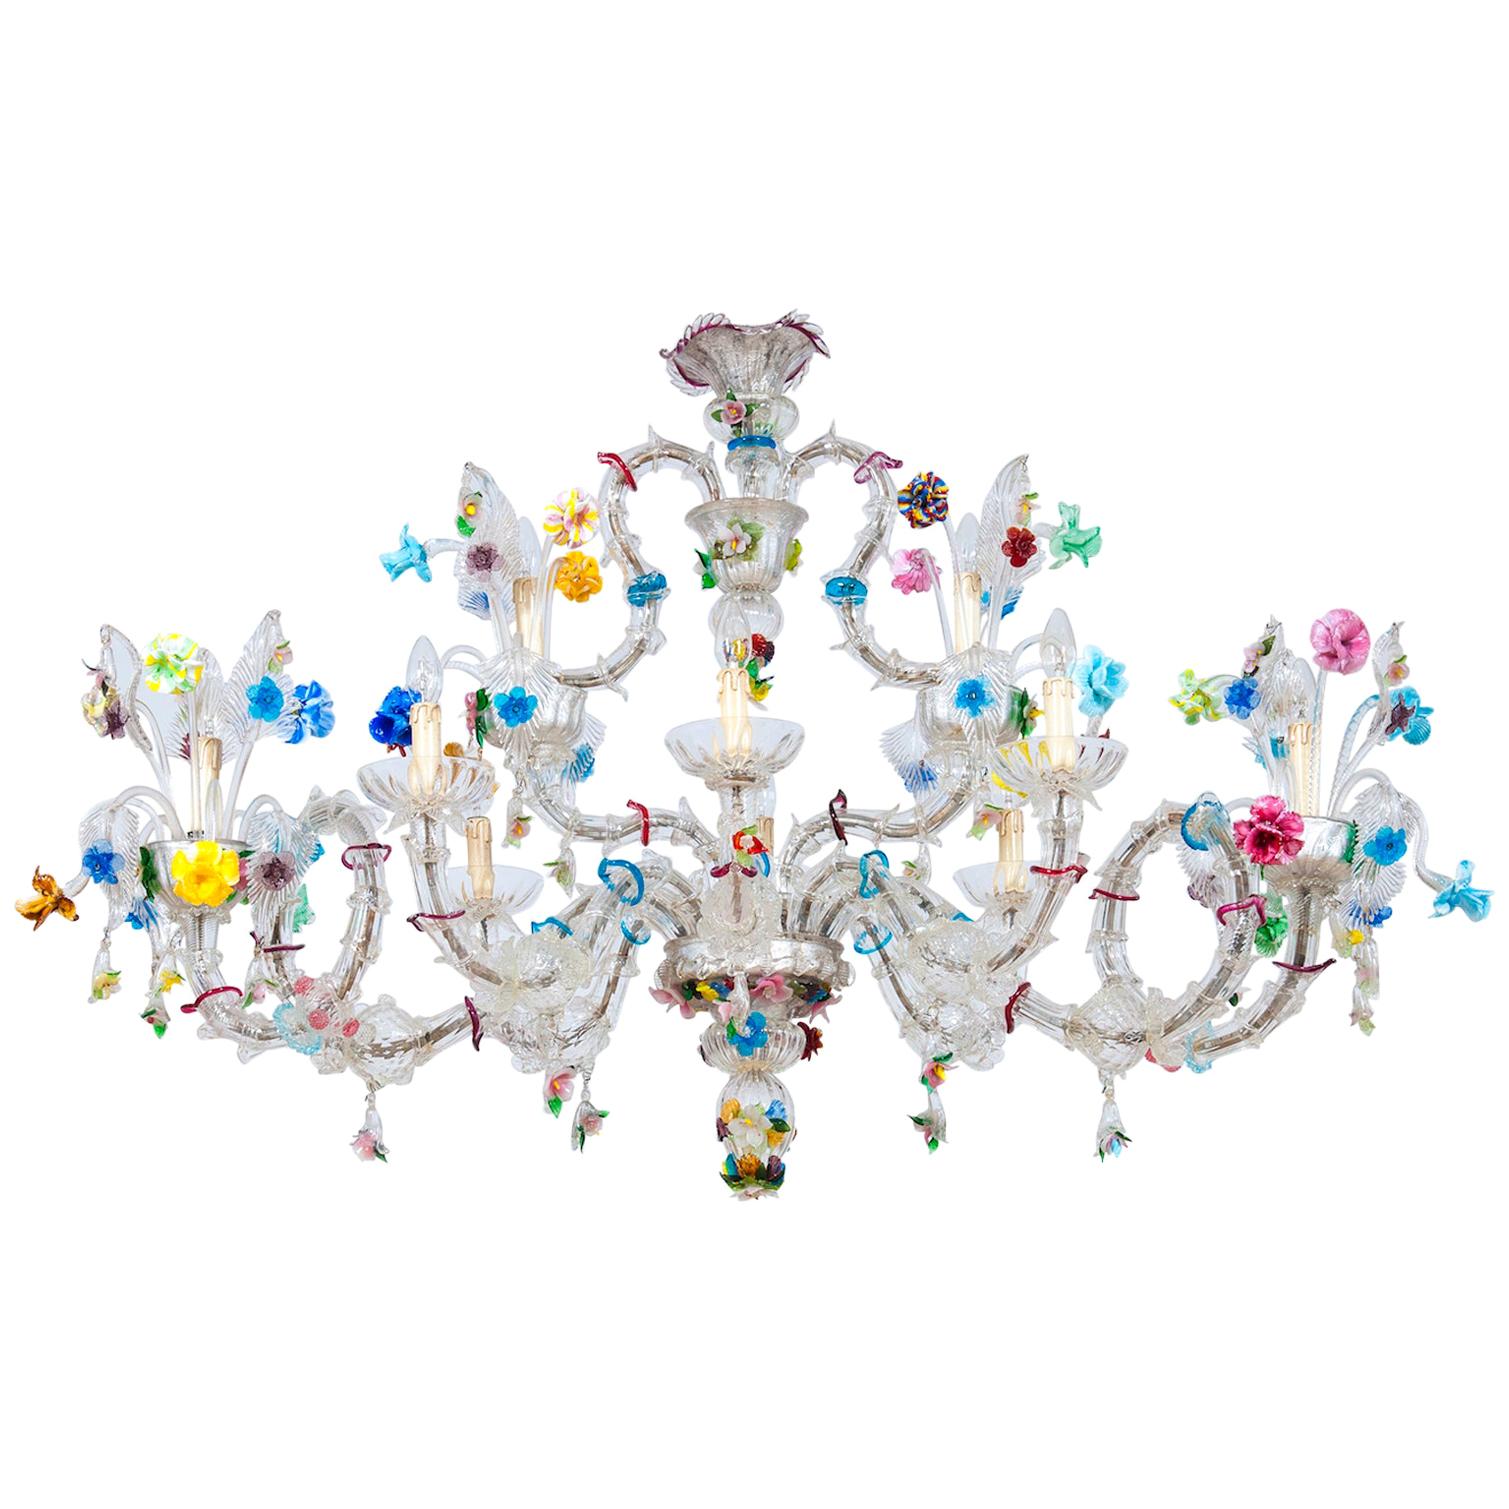 Italian Ca'Rezzonico Gondola Chandelier with Colorful Flowers and Leaves, 1960s